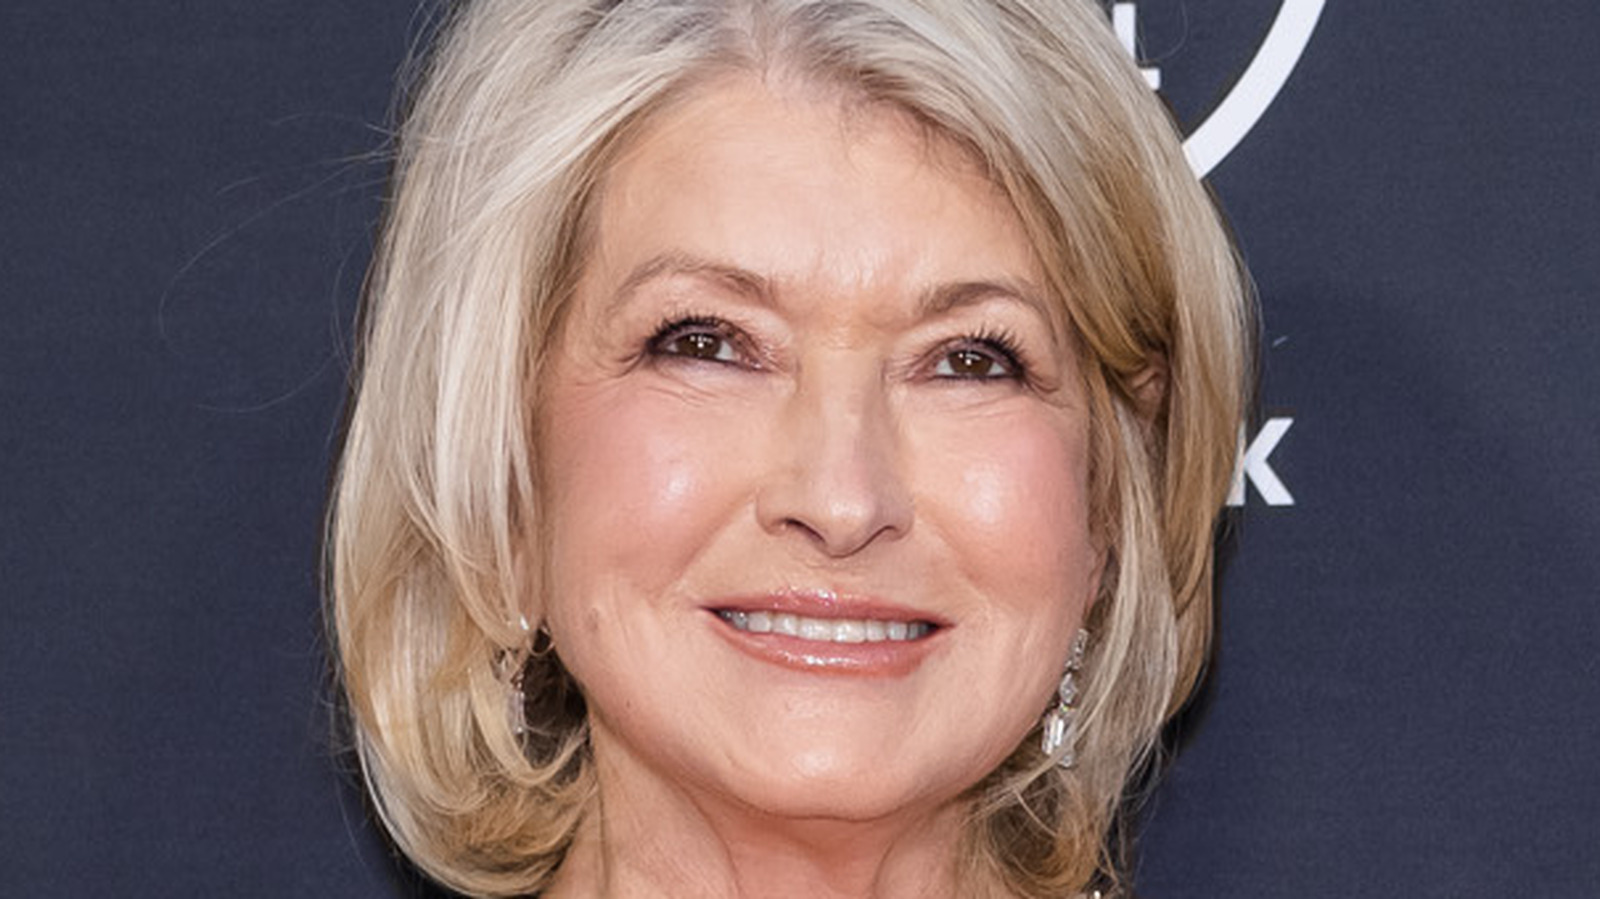 https://www.foodie.com/img/gallery/the-rubber-band-trick-martha-stewart-uses-to-open-stubborn-jars/l-intro-1695935008.jpg